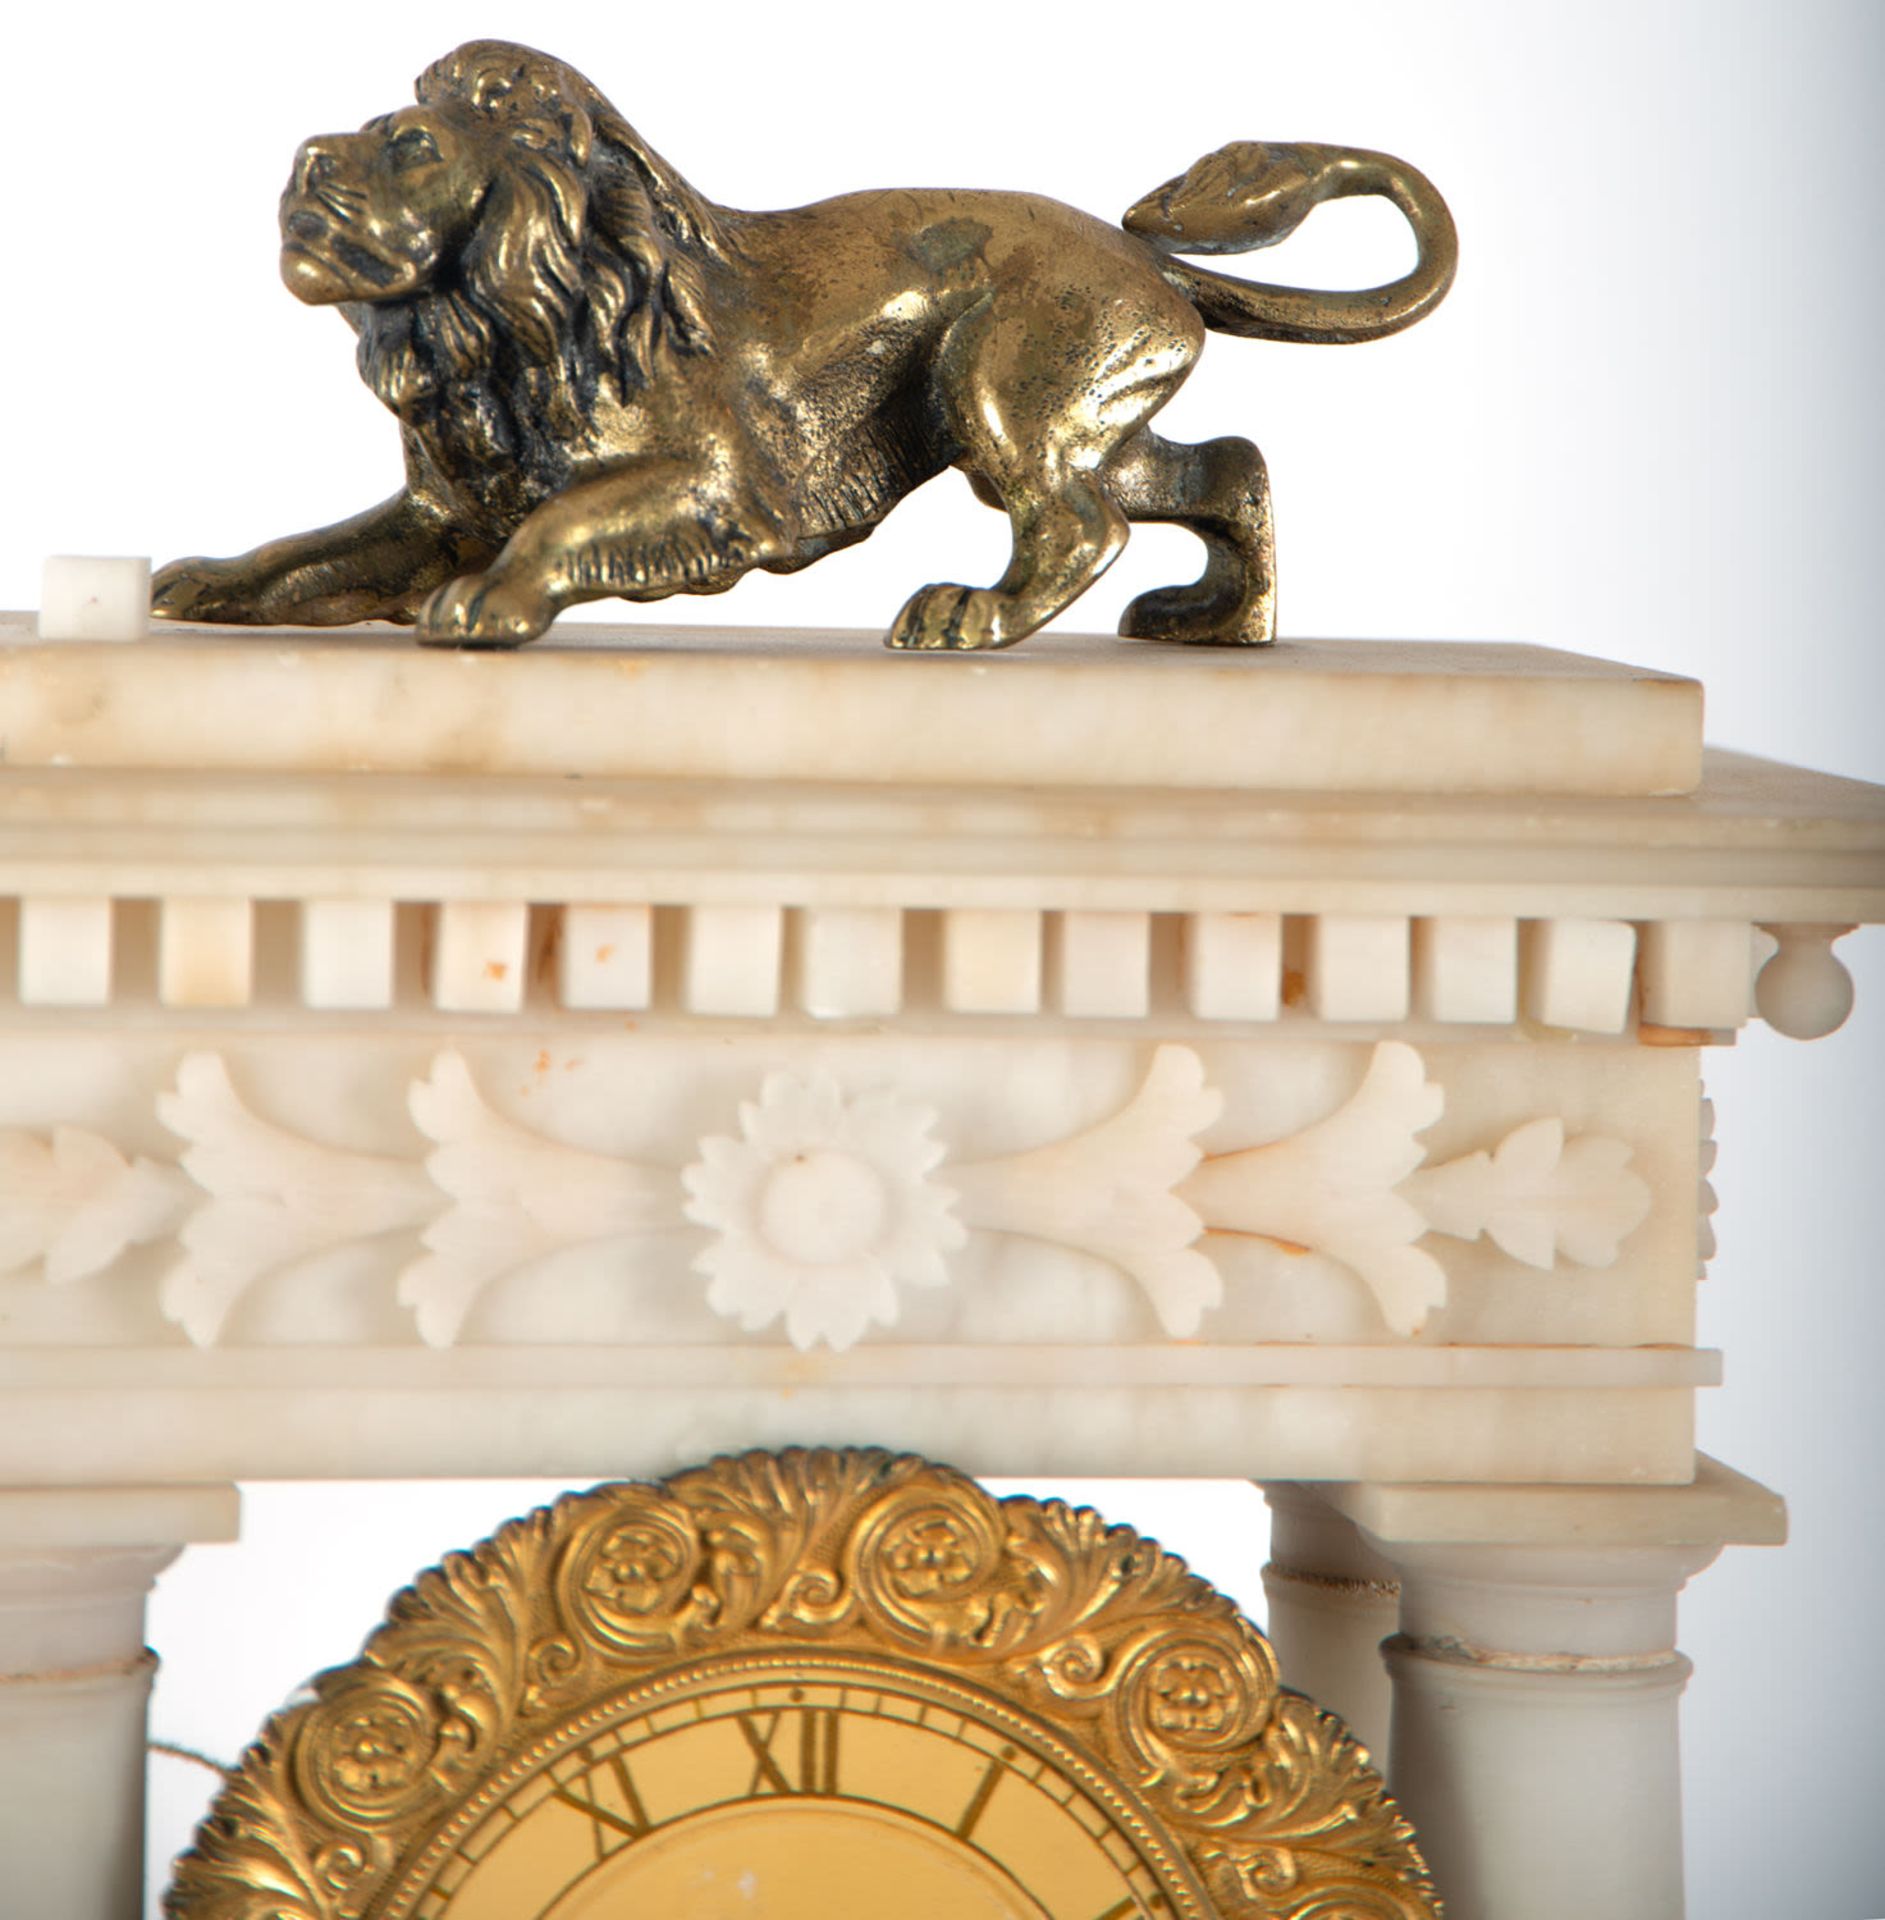 Empire style porch clock in gilt bronze and marble. XIX century - Image 2 of 5